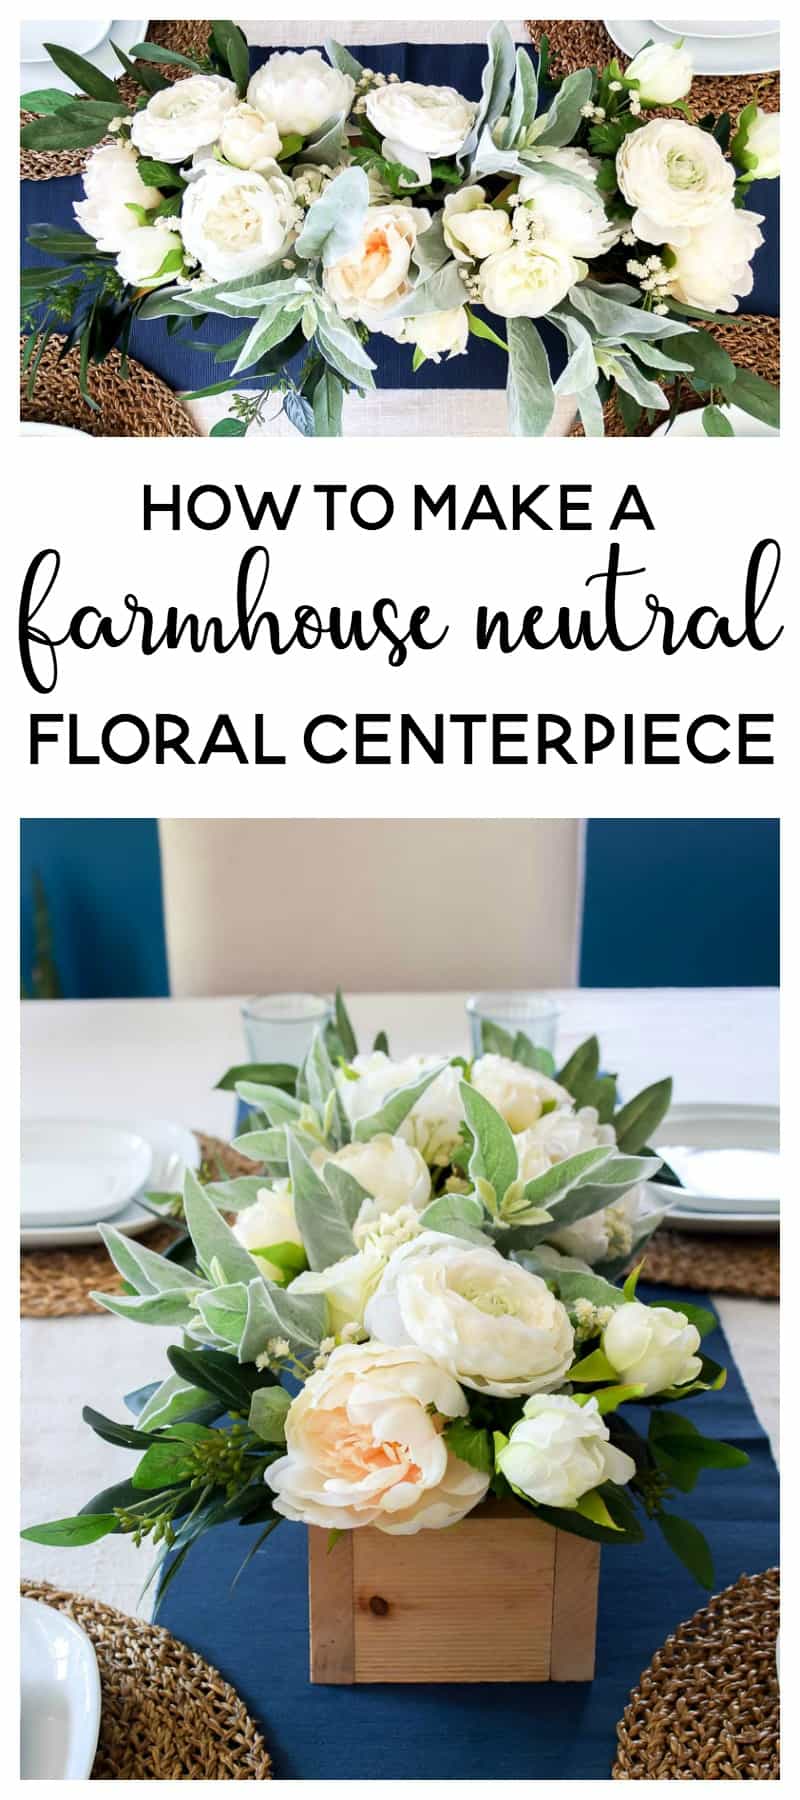 Farmhouse Neutral Floral Centerpiece DIY | See how I made a simple wooden box to use as a centerpiece and filled it to the brim with lovely green and neutral flowers. It's the perfect farmhouse neutral floral centerpiece that can be used in all seasons!